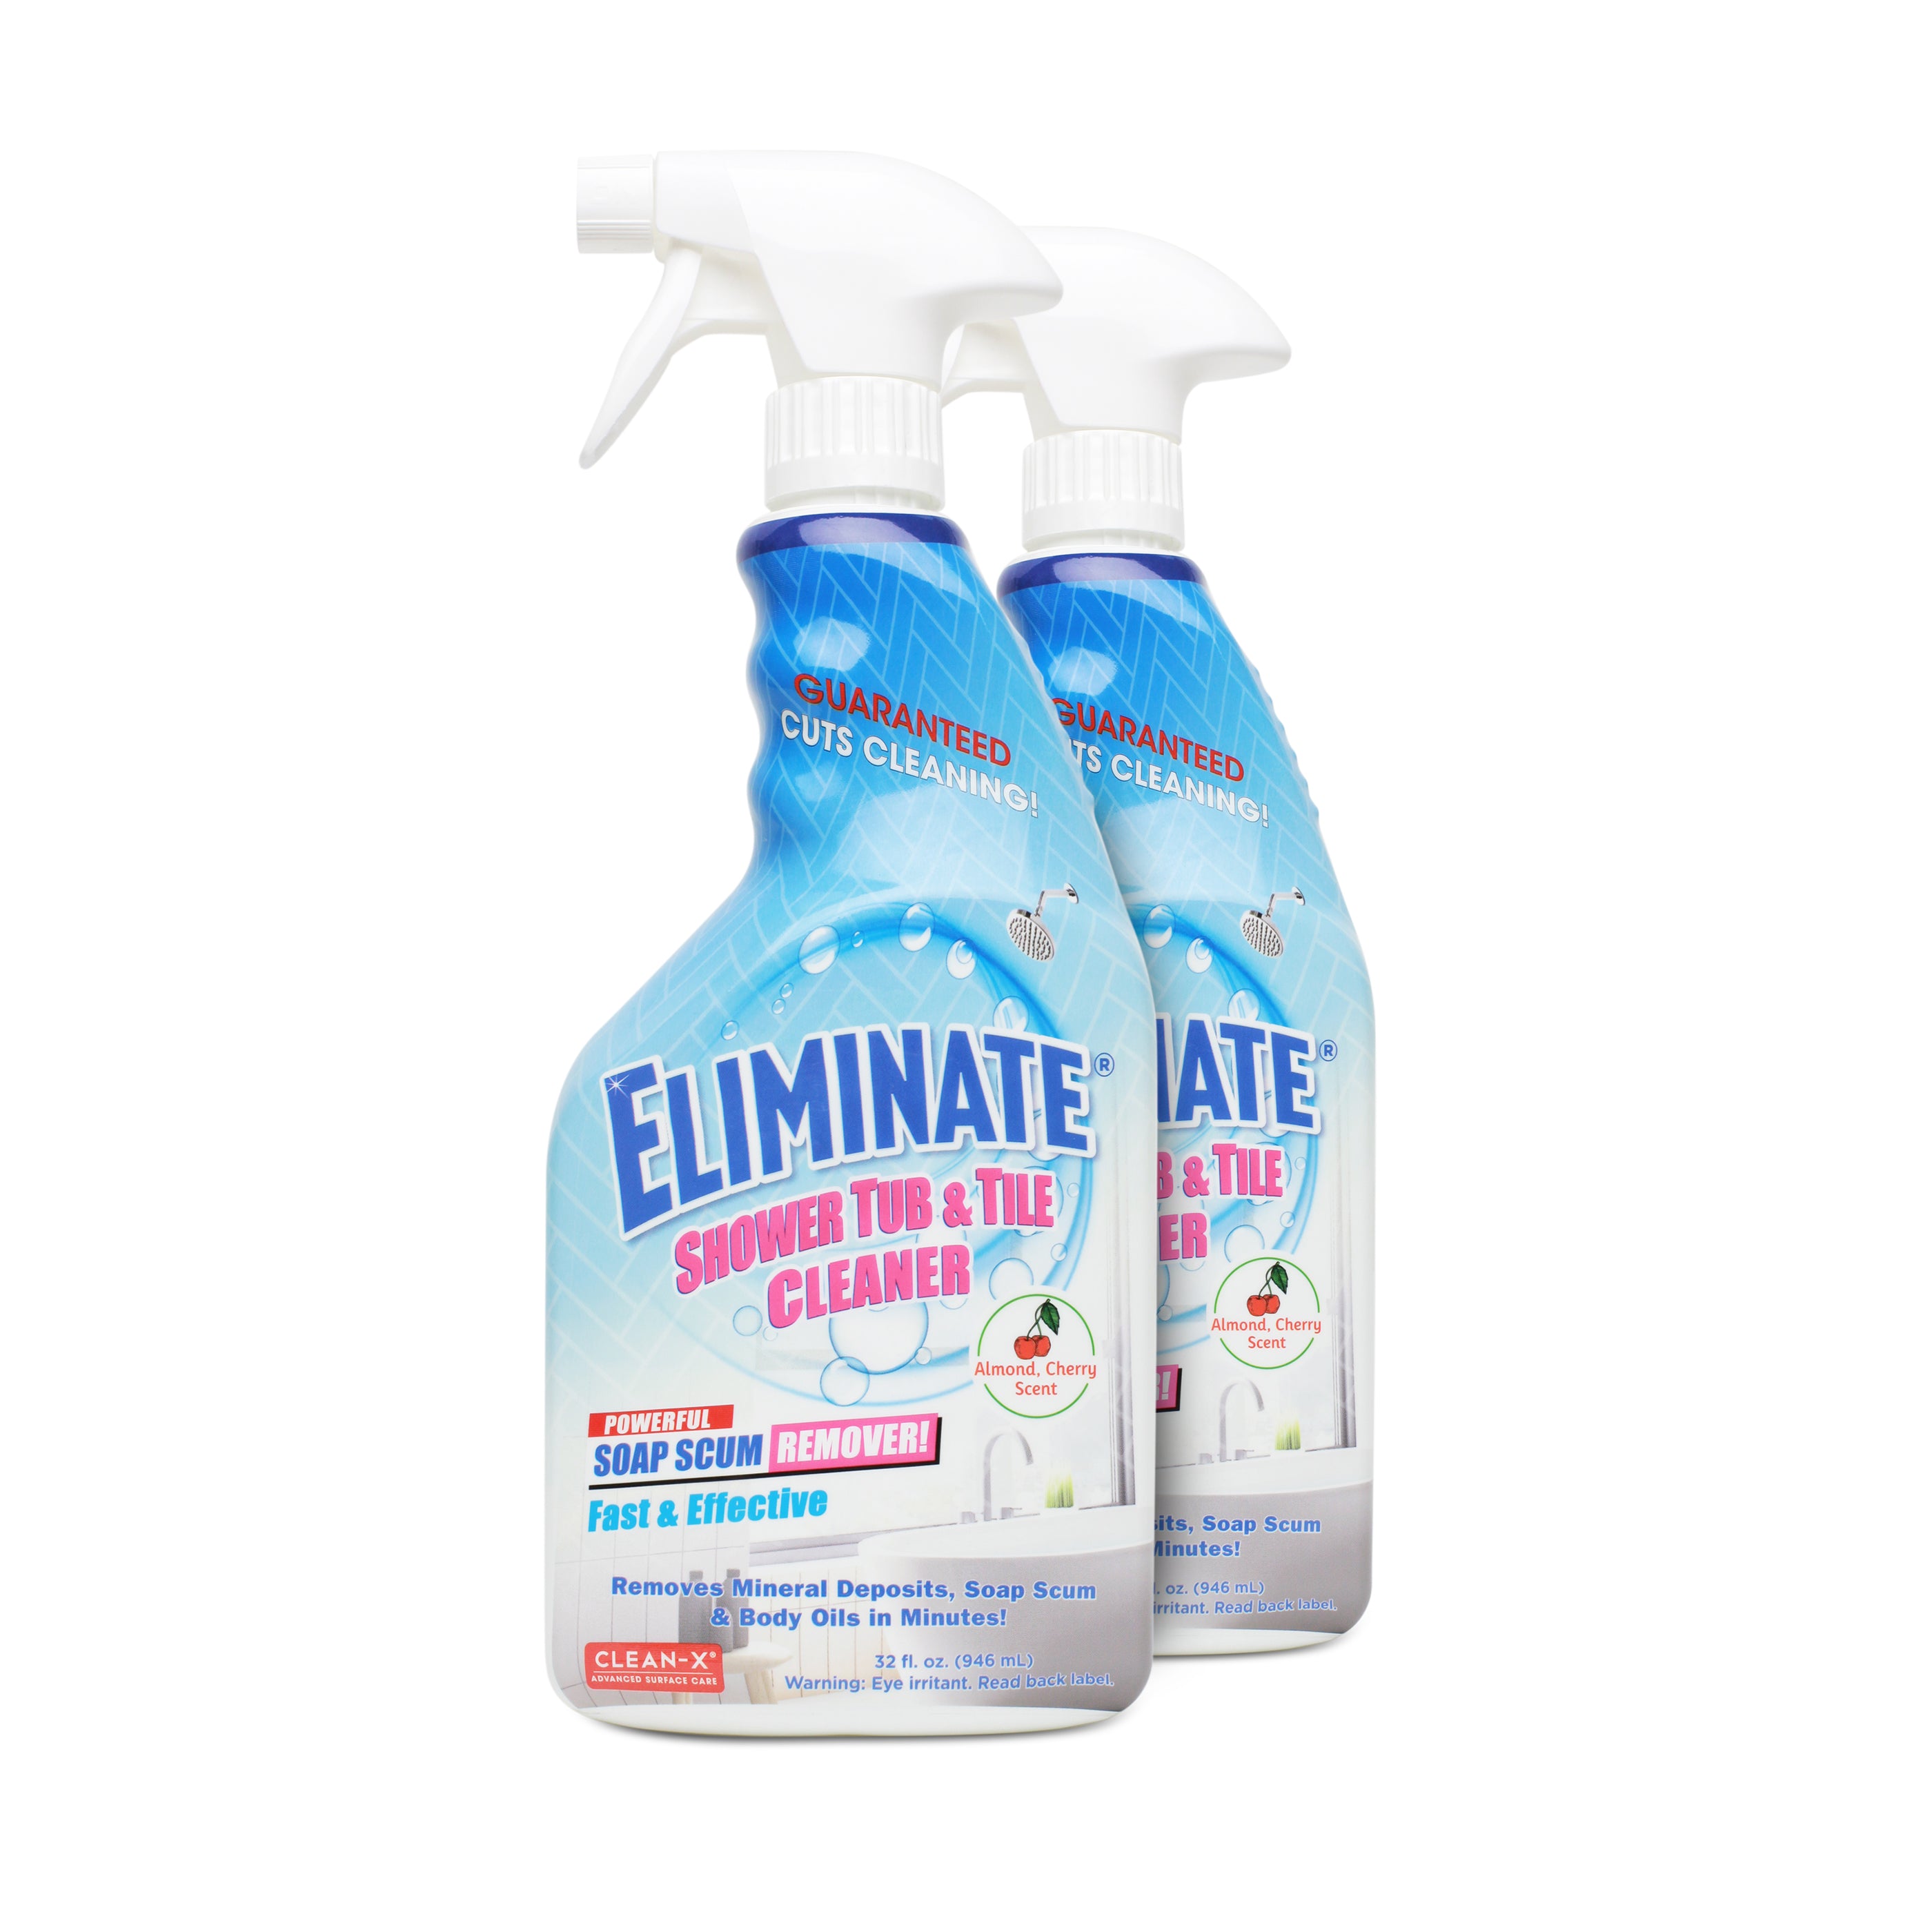 Olympics of bathroom cleaning products 🧼🧻 #cleaning